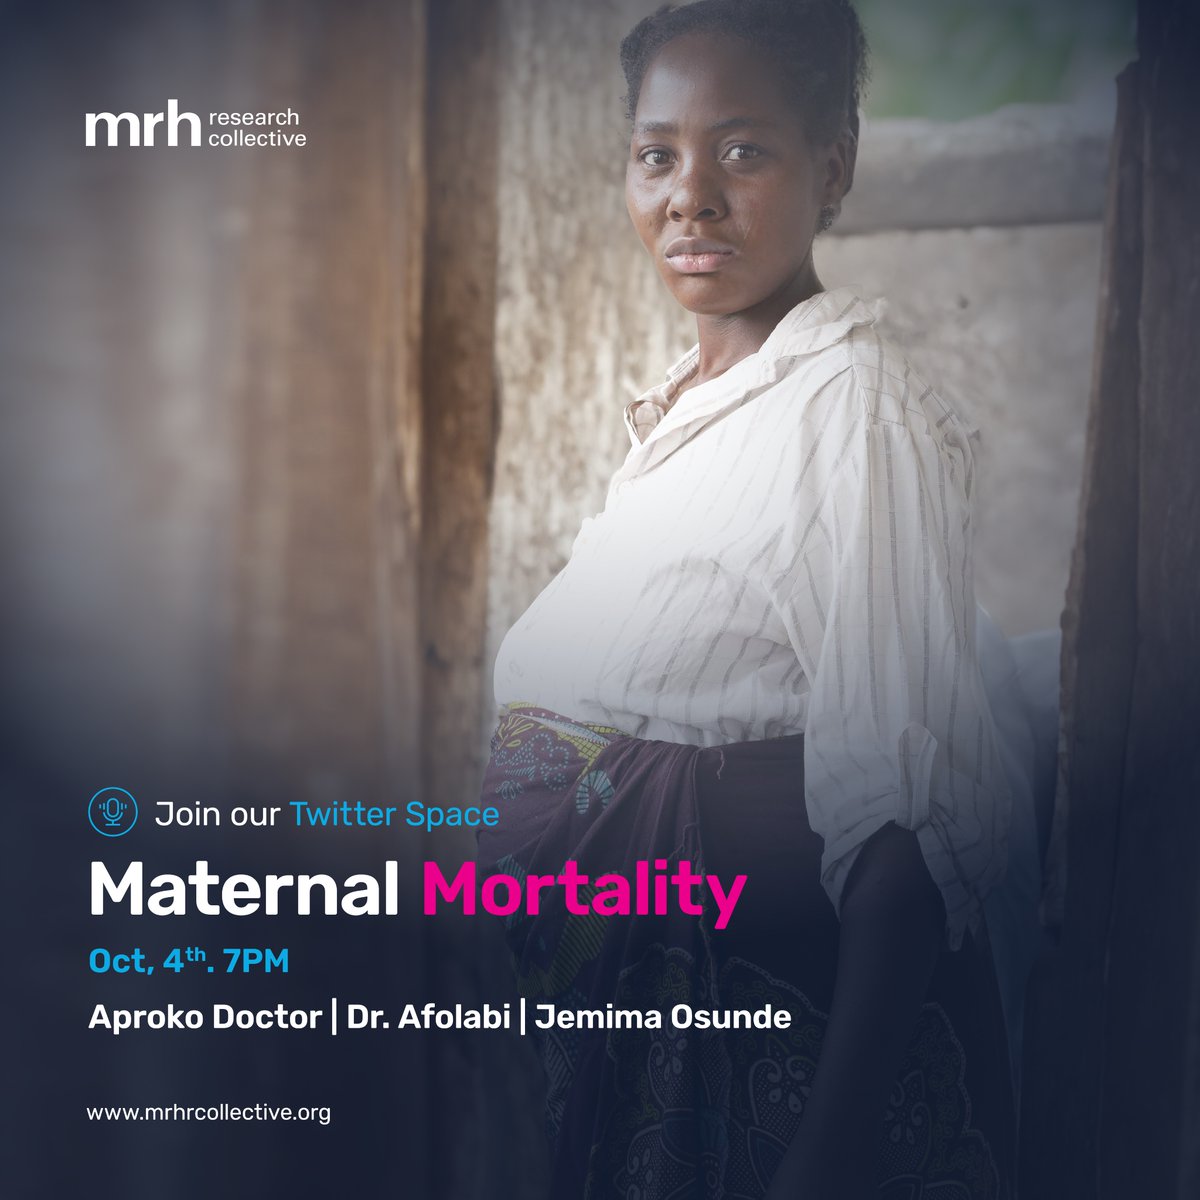 Join @aproko_doctor @Coolgynae @JemimaOsunde on twitter space as they discuss the impact of maternal mortality in Nigeria. #KeepHerAlive #MRHR